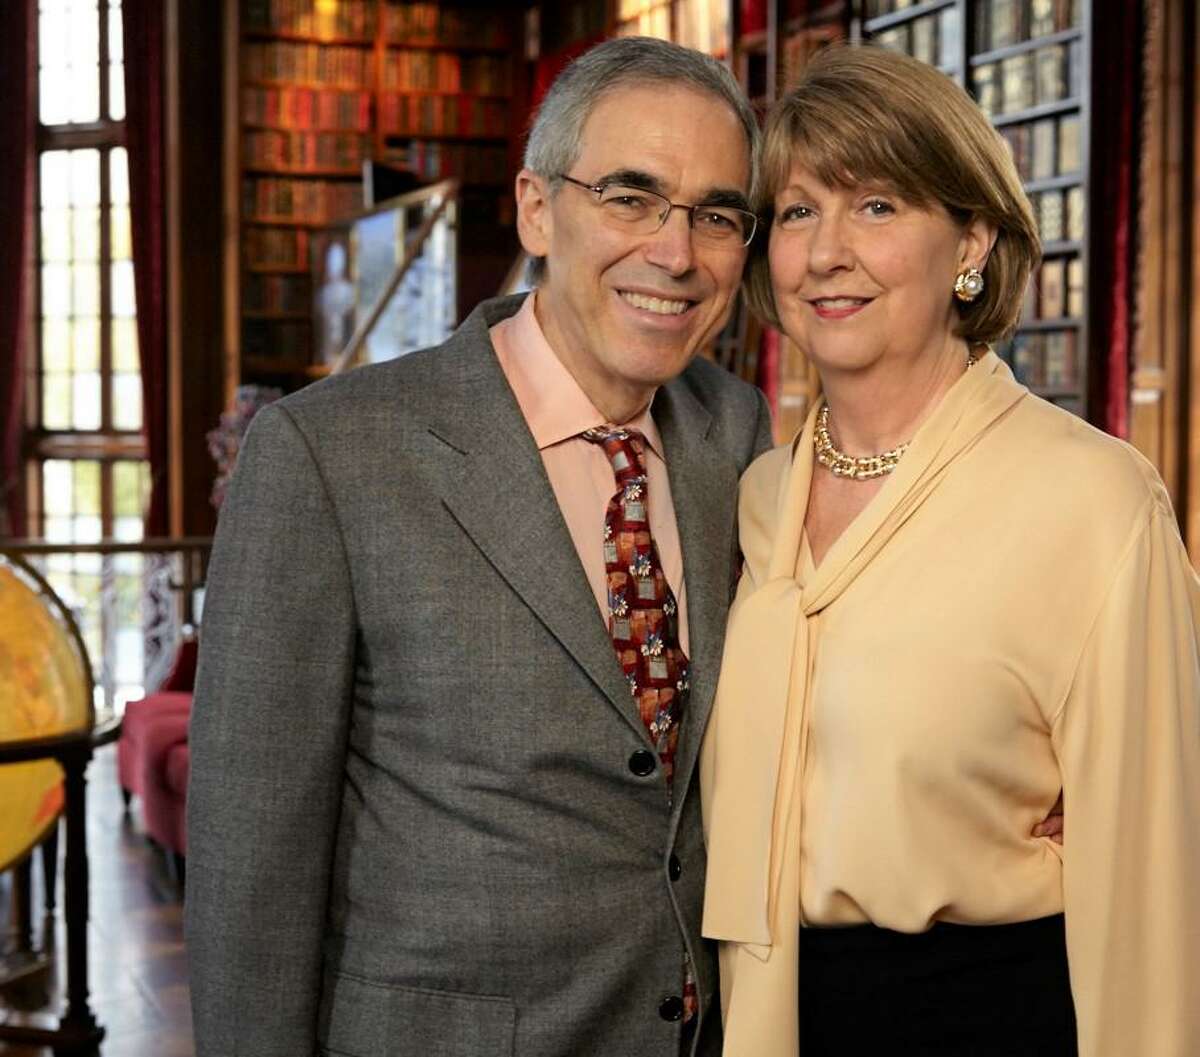 Jay and Eileen Walker will be honored at the Ridgefield Library’s virtual “Great Expectations Gala” on Saturday, May 22.